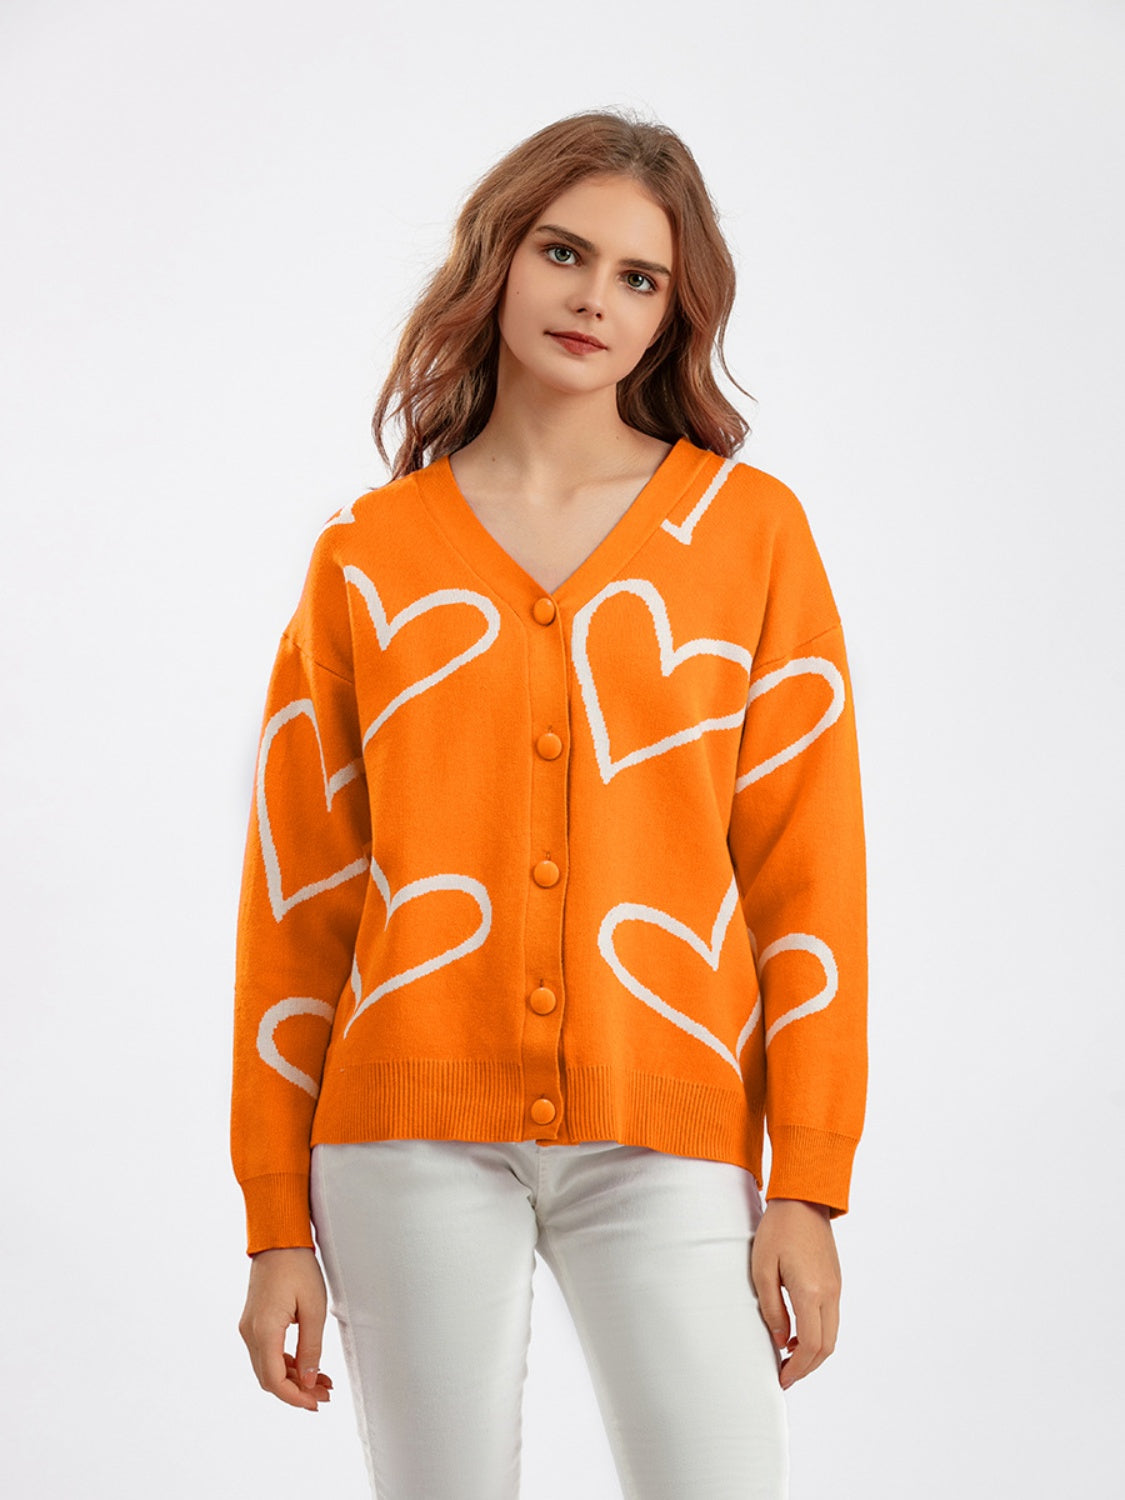 Heart Button Down Cardigan - Women’s Clothing & Accessories - Shirts & Tops - 8 - 2024